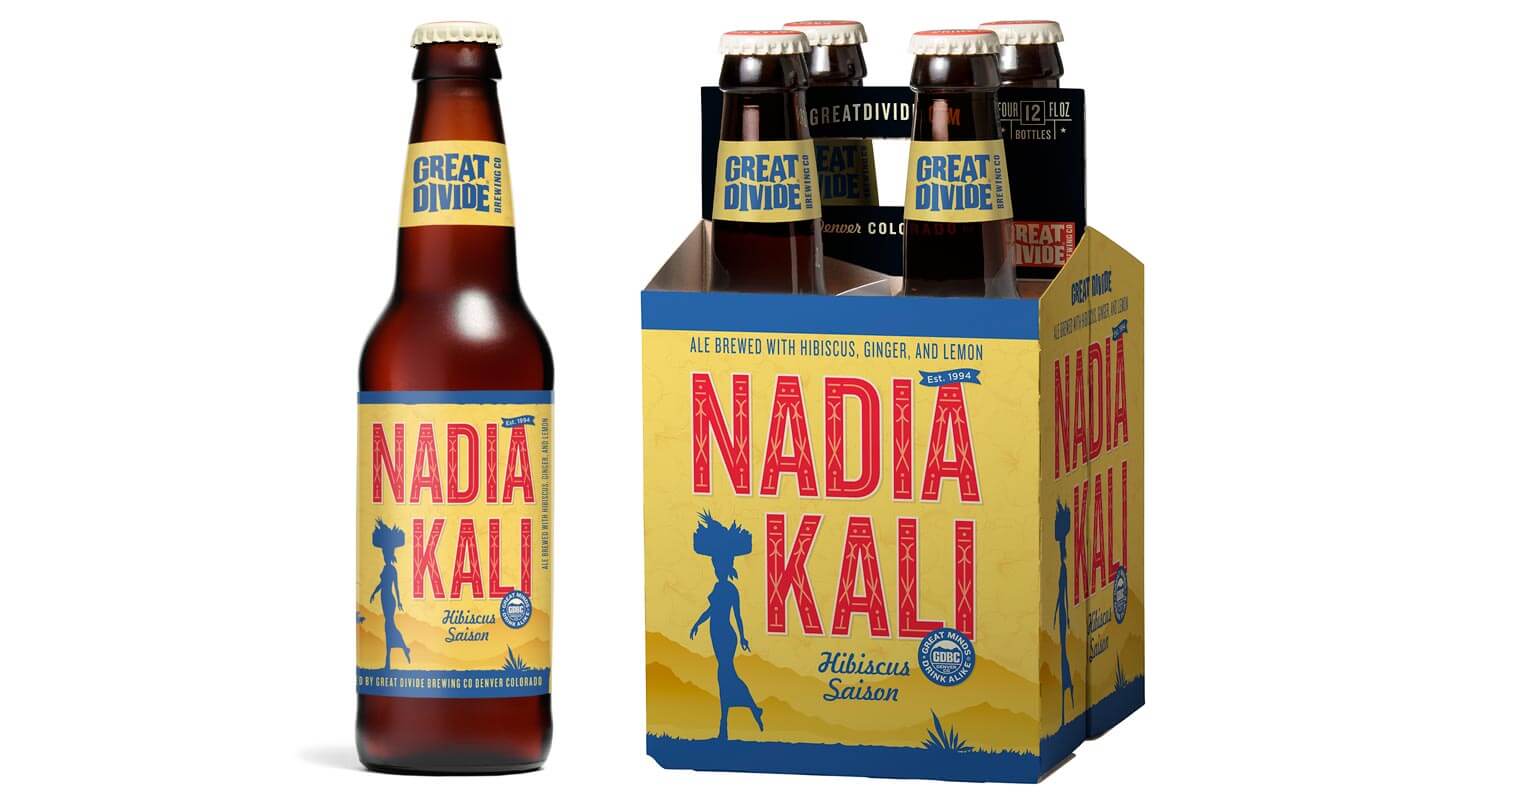 Nadia Kali from Great Divide Brewing Company, featured image